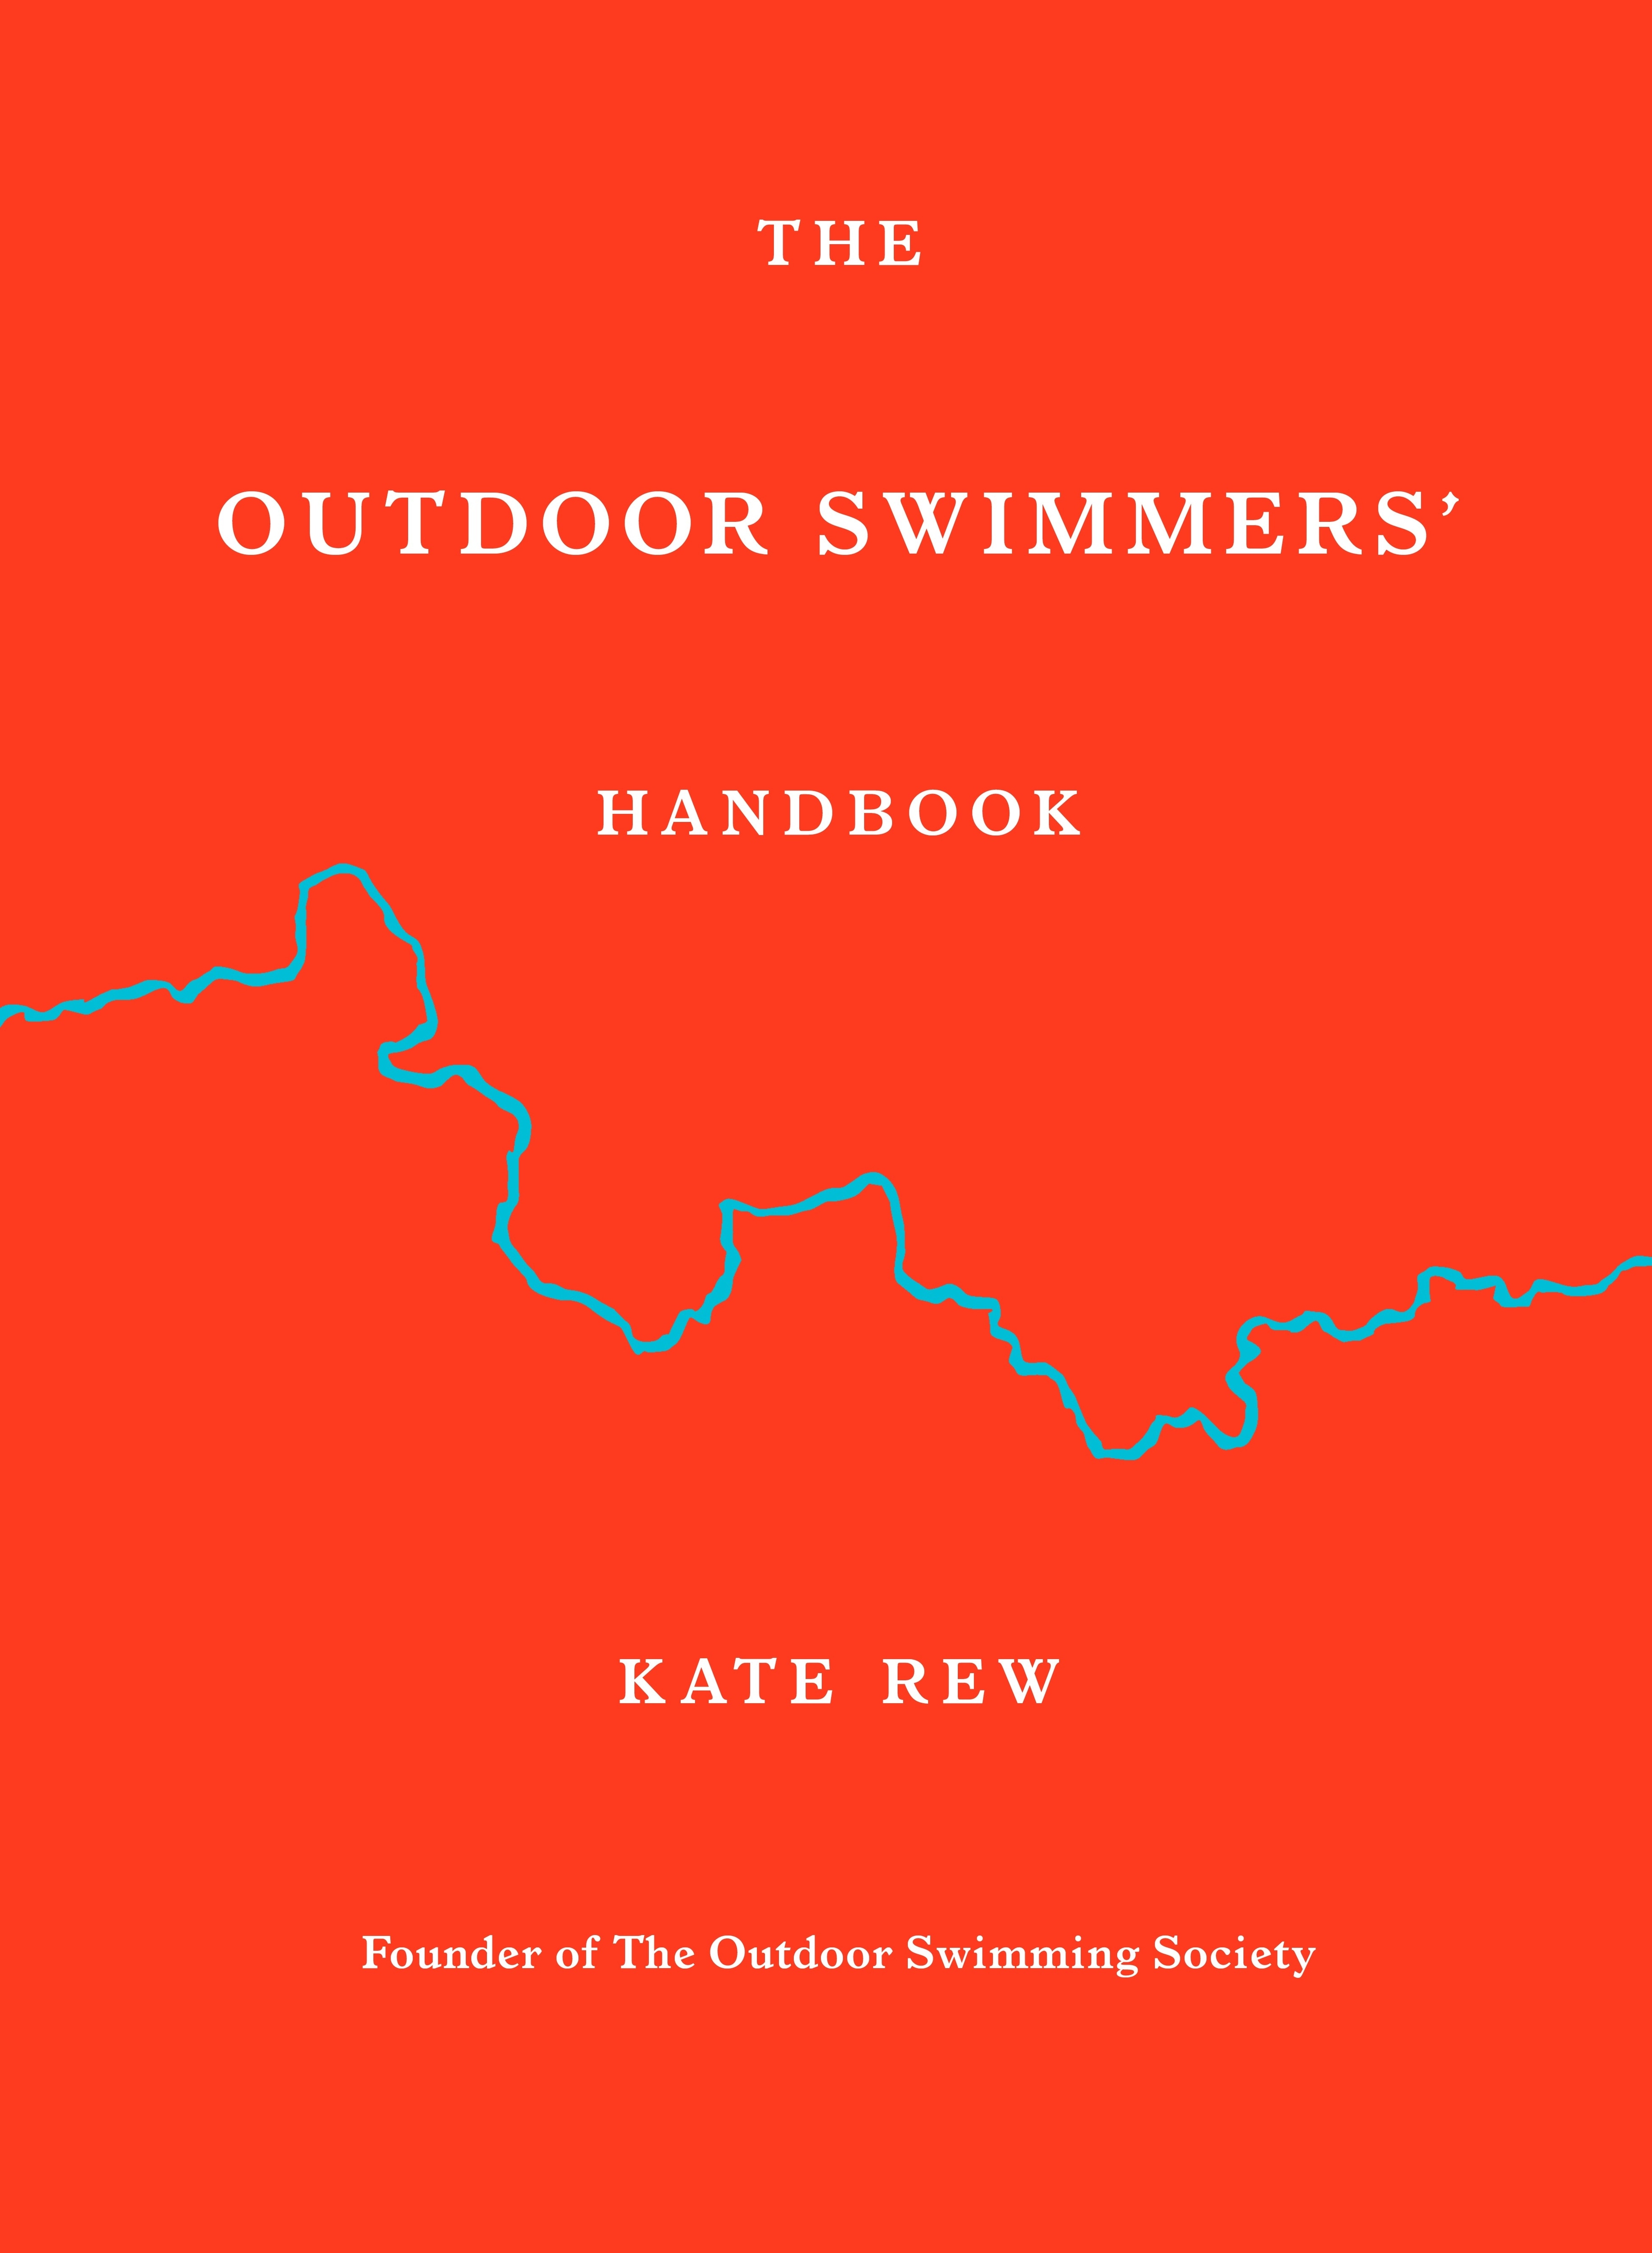 Book “The Outdoor Swimmers' Handbook” by Kate Rew — June 9, 2022